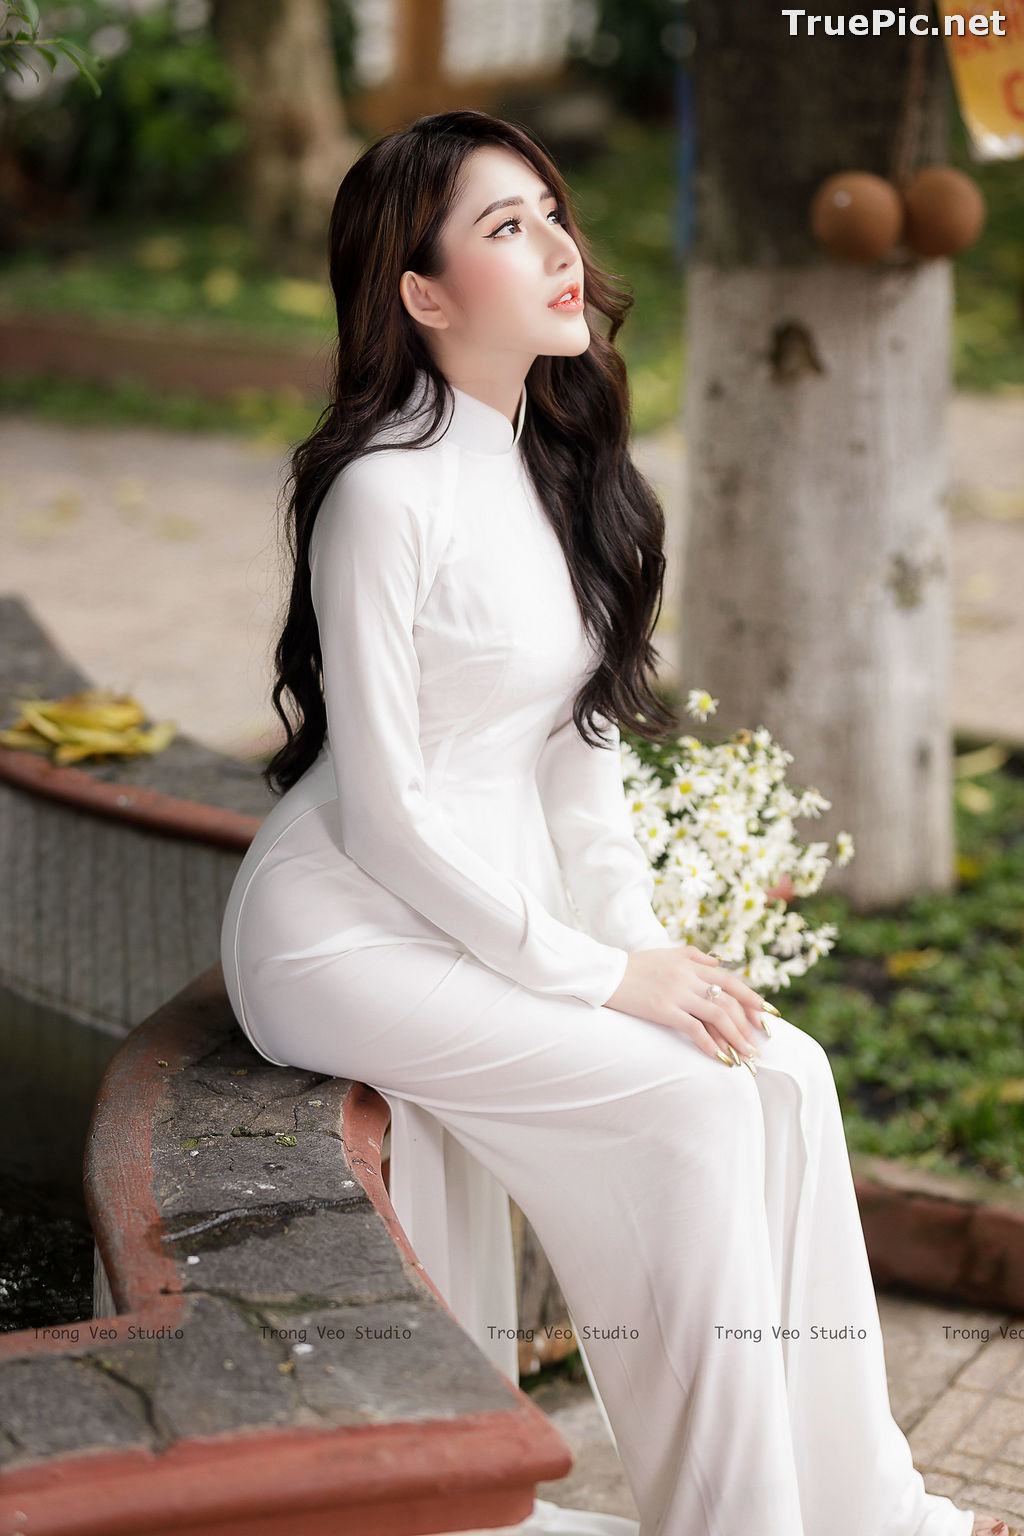 The Beauty of Vietnamese Girls with Traditional Dress (Ao Dai) #3